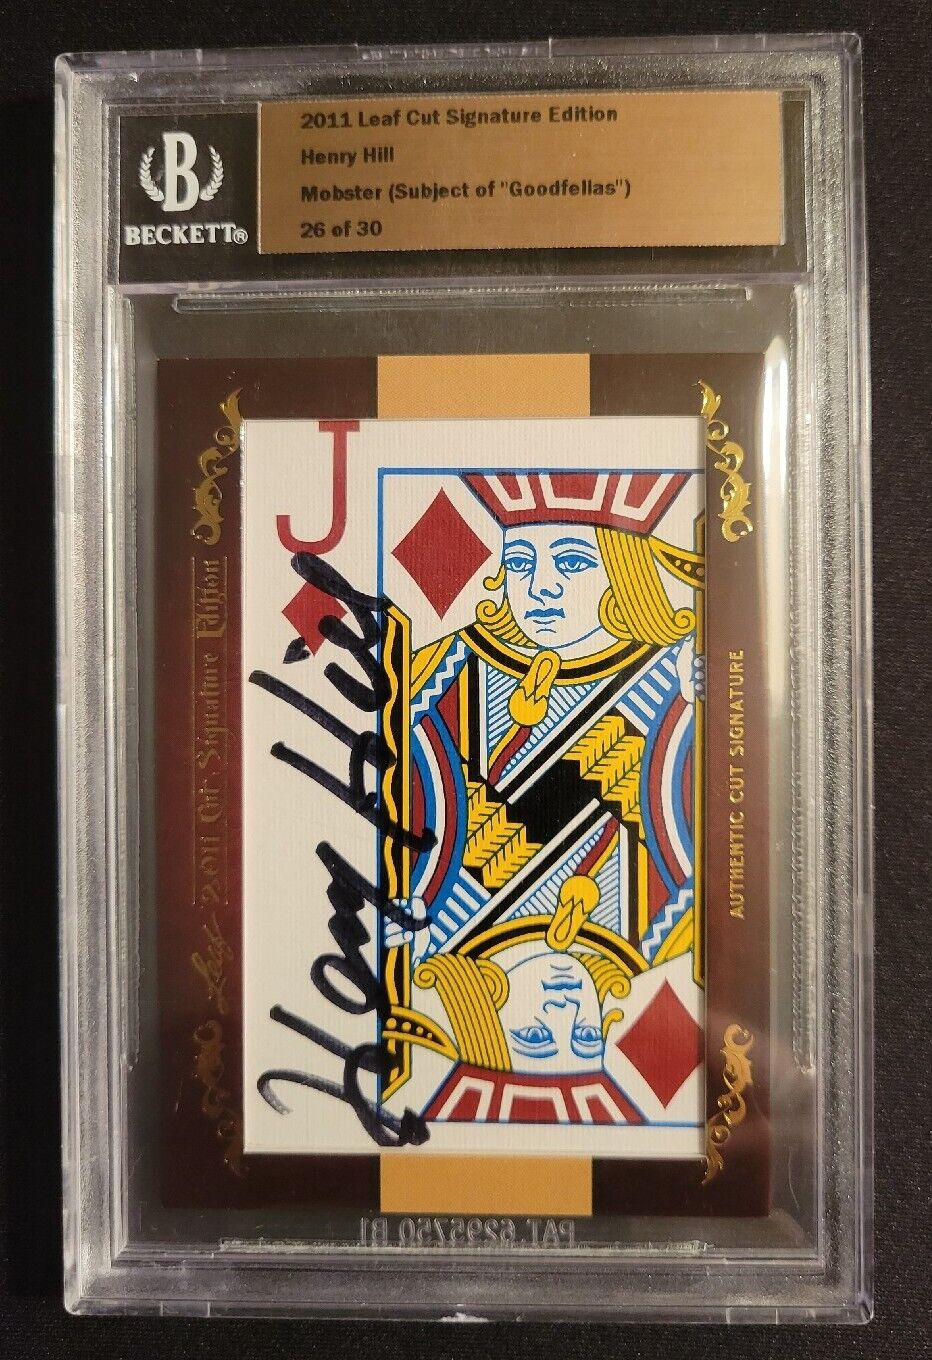 2011 Leaf Cut Signature Edition Henry Hill Goodfellas Mobster auto autograph BGS